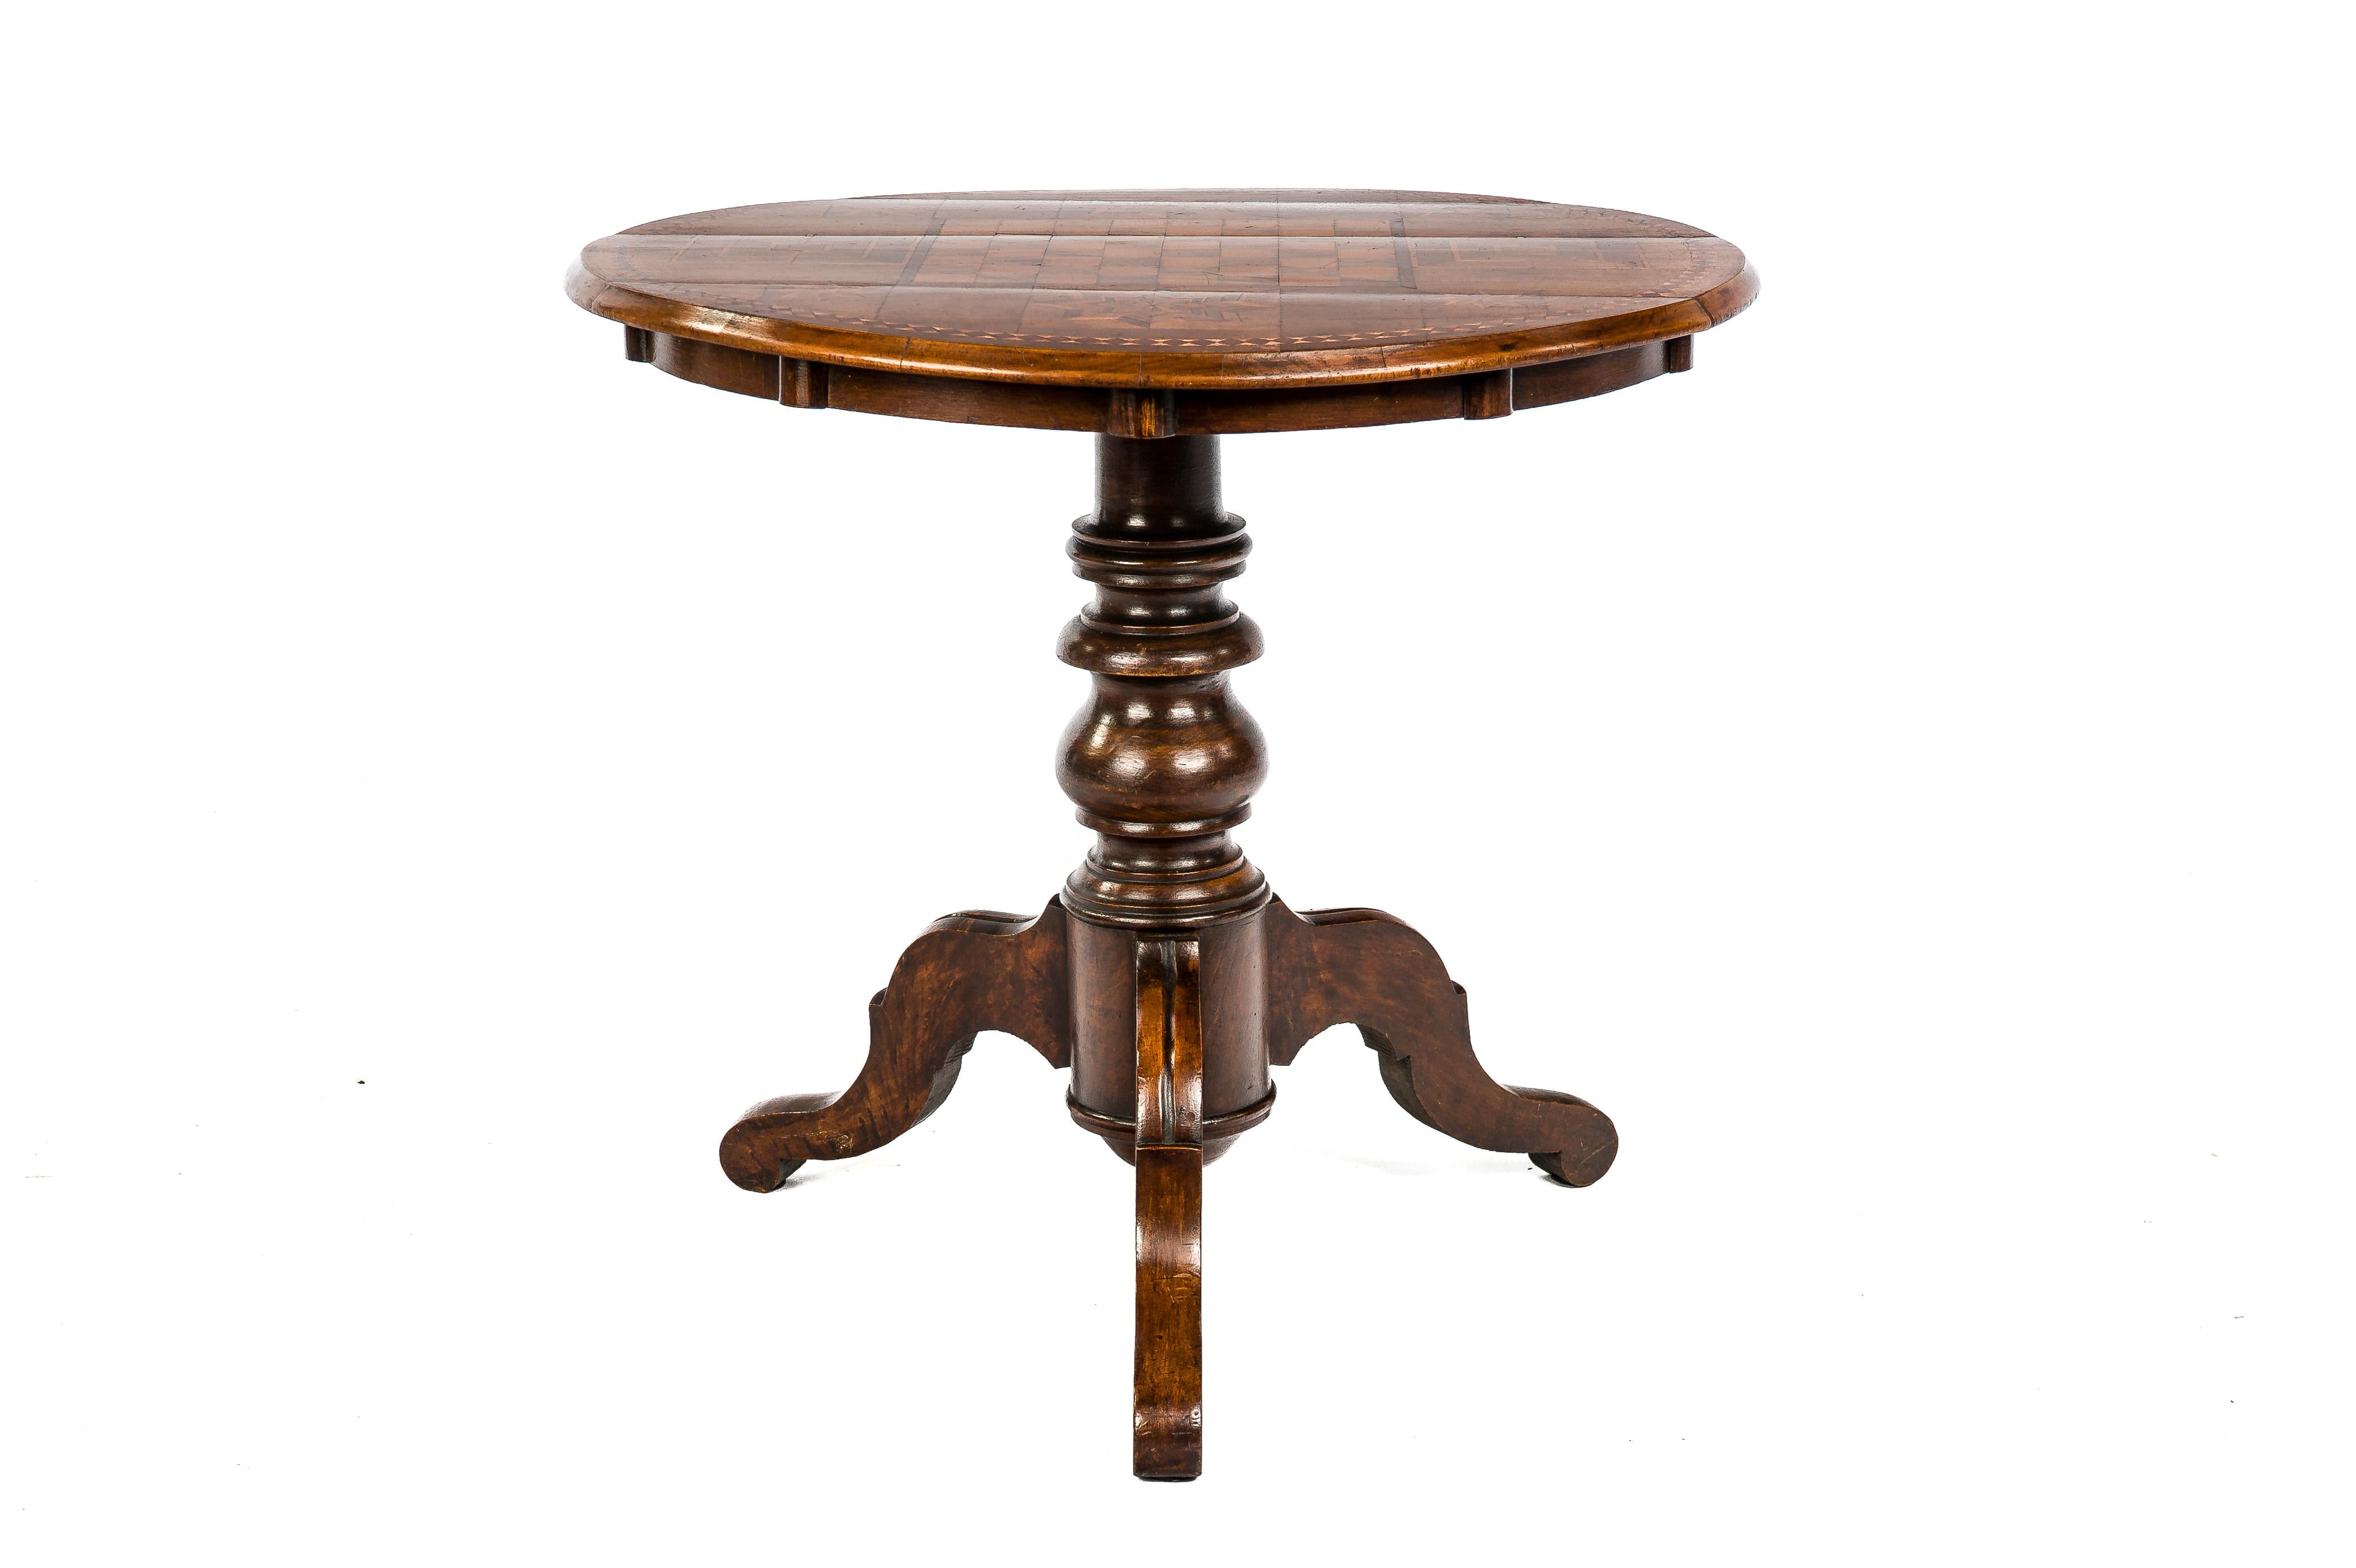 This beautiful Louis Philippe-style tilt-top game table was made in Italy circa 1870. The table was made in the finest quality walnut and features an exquisite inlaid top. The tabletop can be tilted in an upright position so it takes less space and